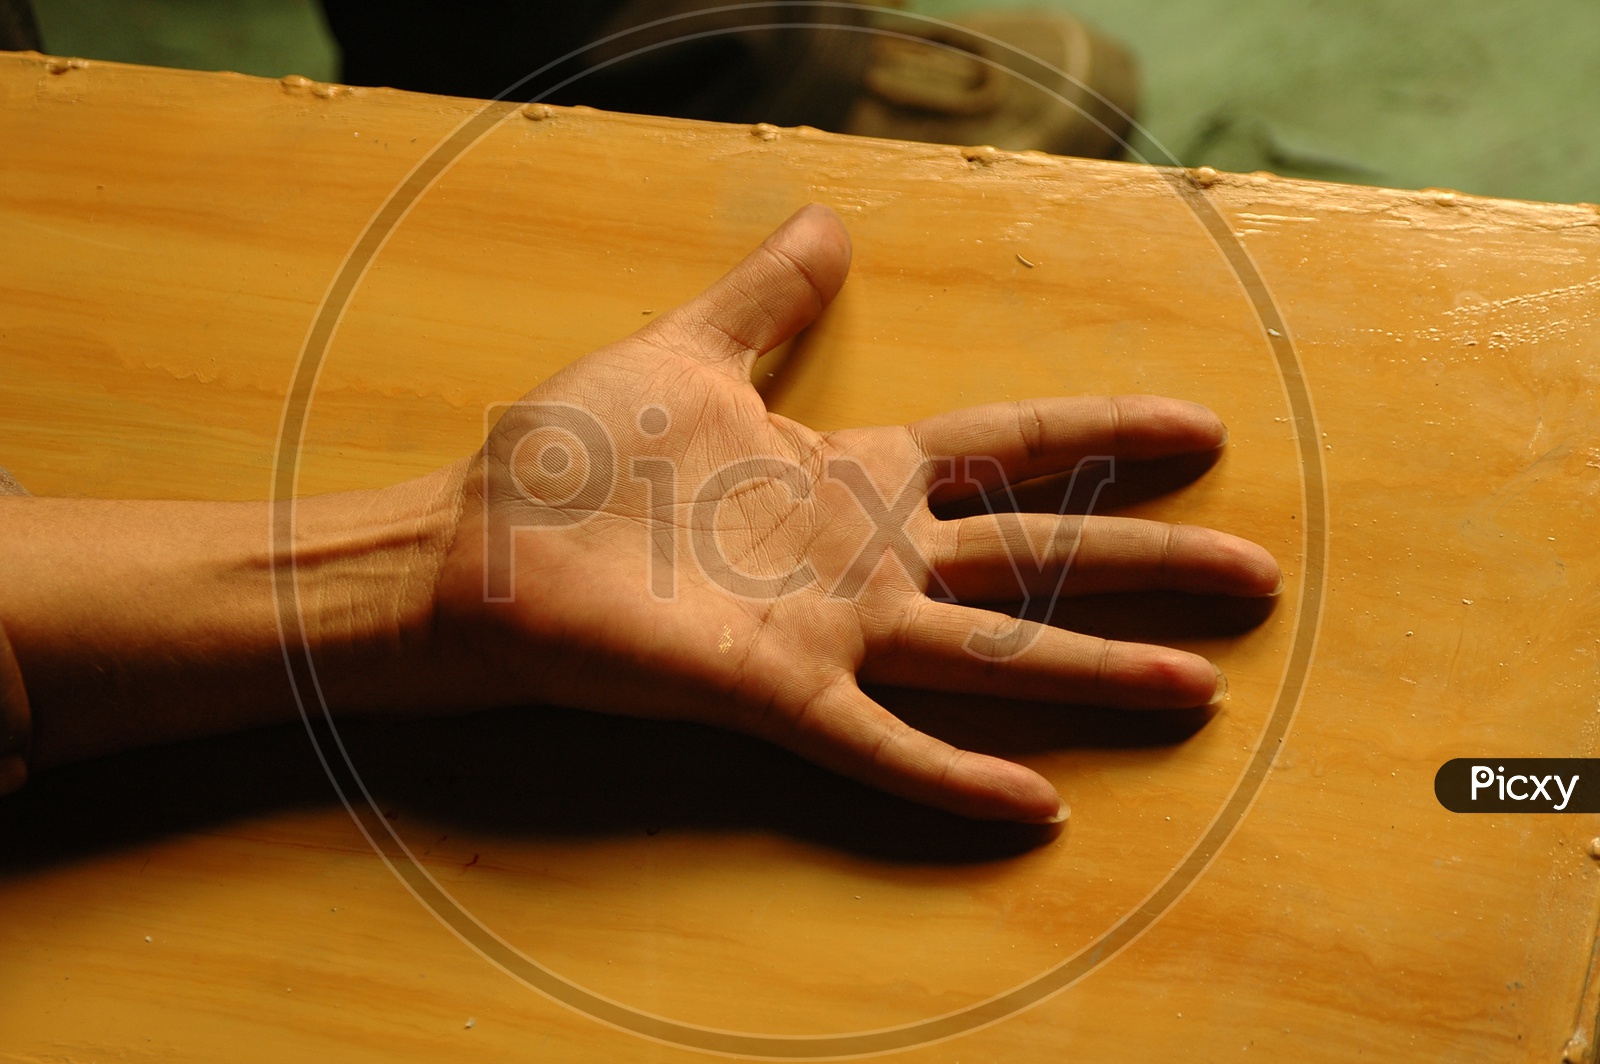 Palm of a hand on the wooden board